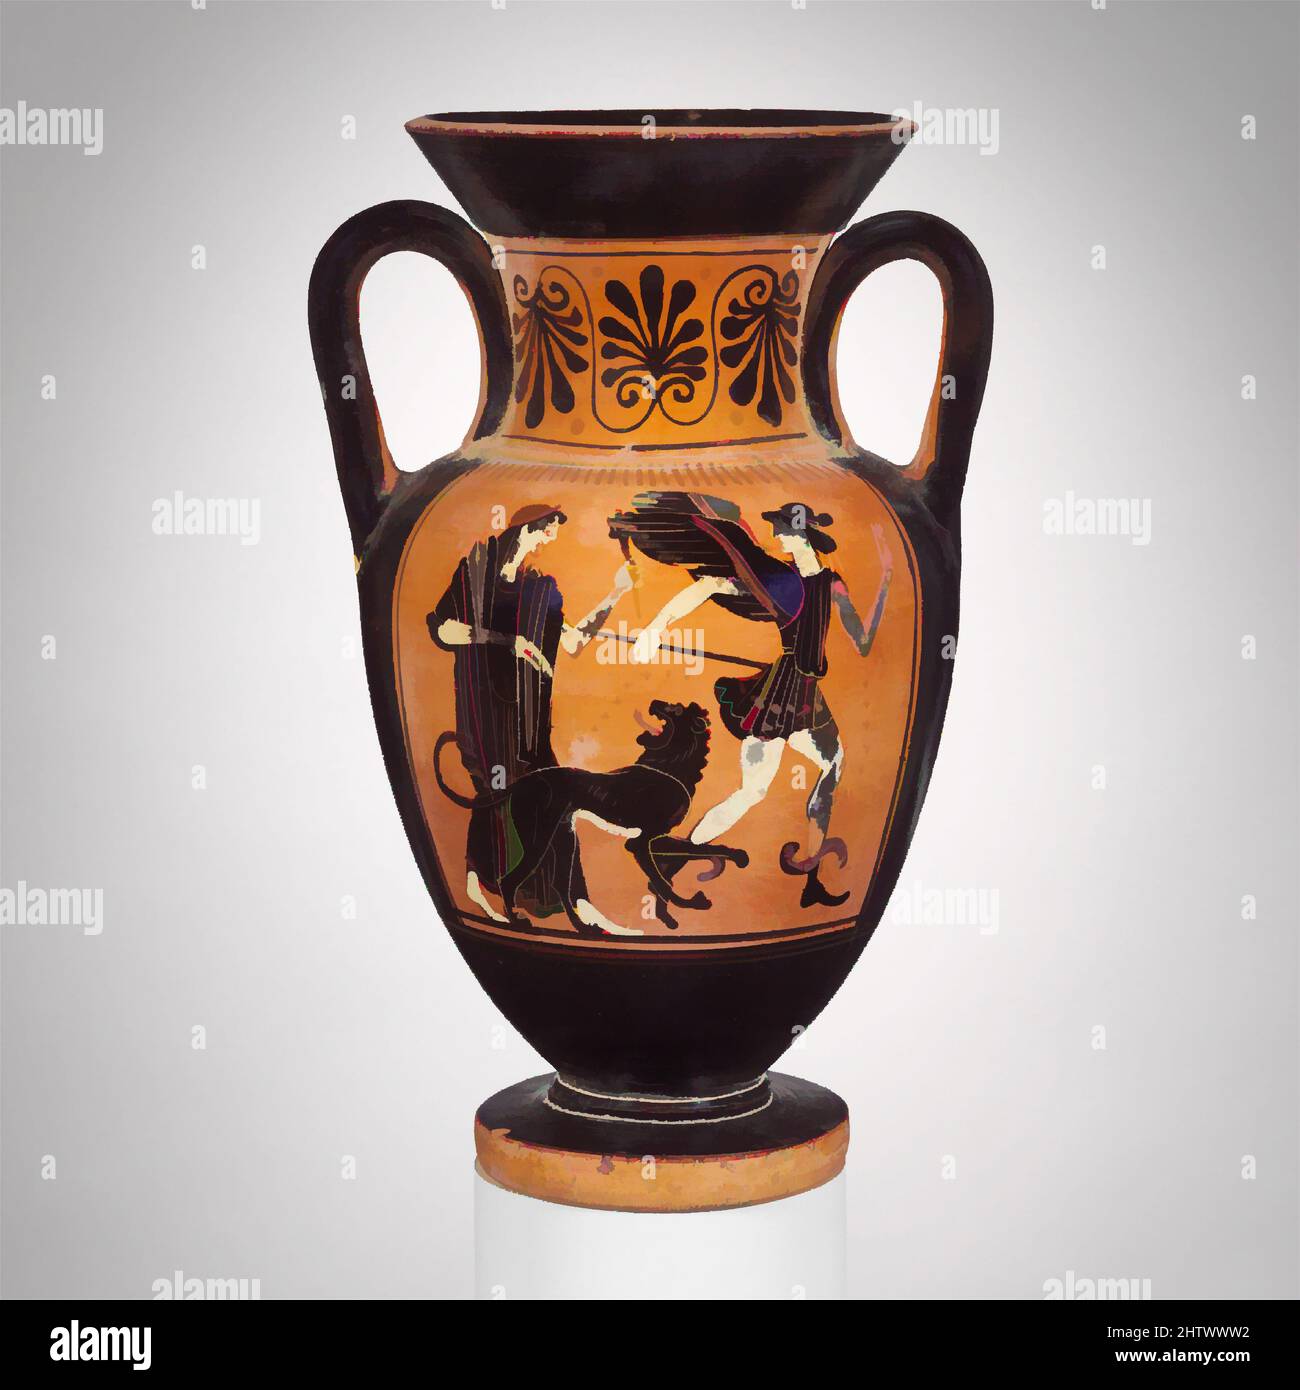 Art inspired by Terracotta neck-amphora (jar), Archaic, ca. 500 B.C., Greek, Attic, Terracotta; black-figure, Height: 8 7/8 in. (22.5 cm), Vases, Obverse, Hera sending out Iris with the Nemean lion, Reverse, Herakles wrestling the Nemean lion. The very rare representation on the, Classic works modernized by Artotop with a splash of modernity. Shapes, color and value, eye-catching visual impact on art. Emotions through freedom of artworks in a contemporary way. A timeless message pursuing a wildly creative new direction. Artists turning to the digital medium and creating the Artotop NFT Stock Photo